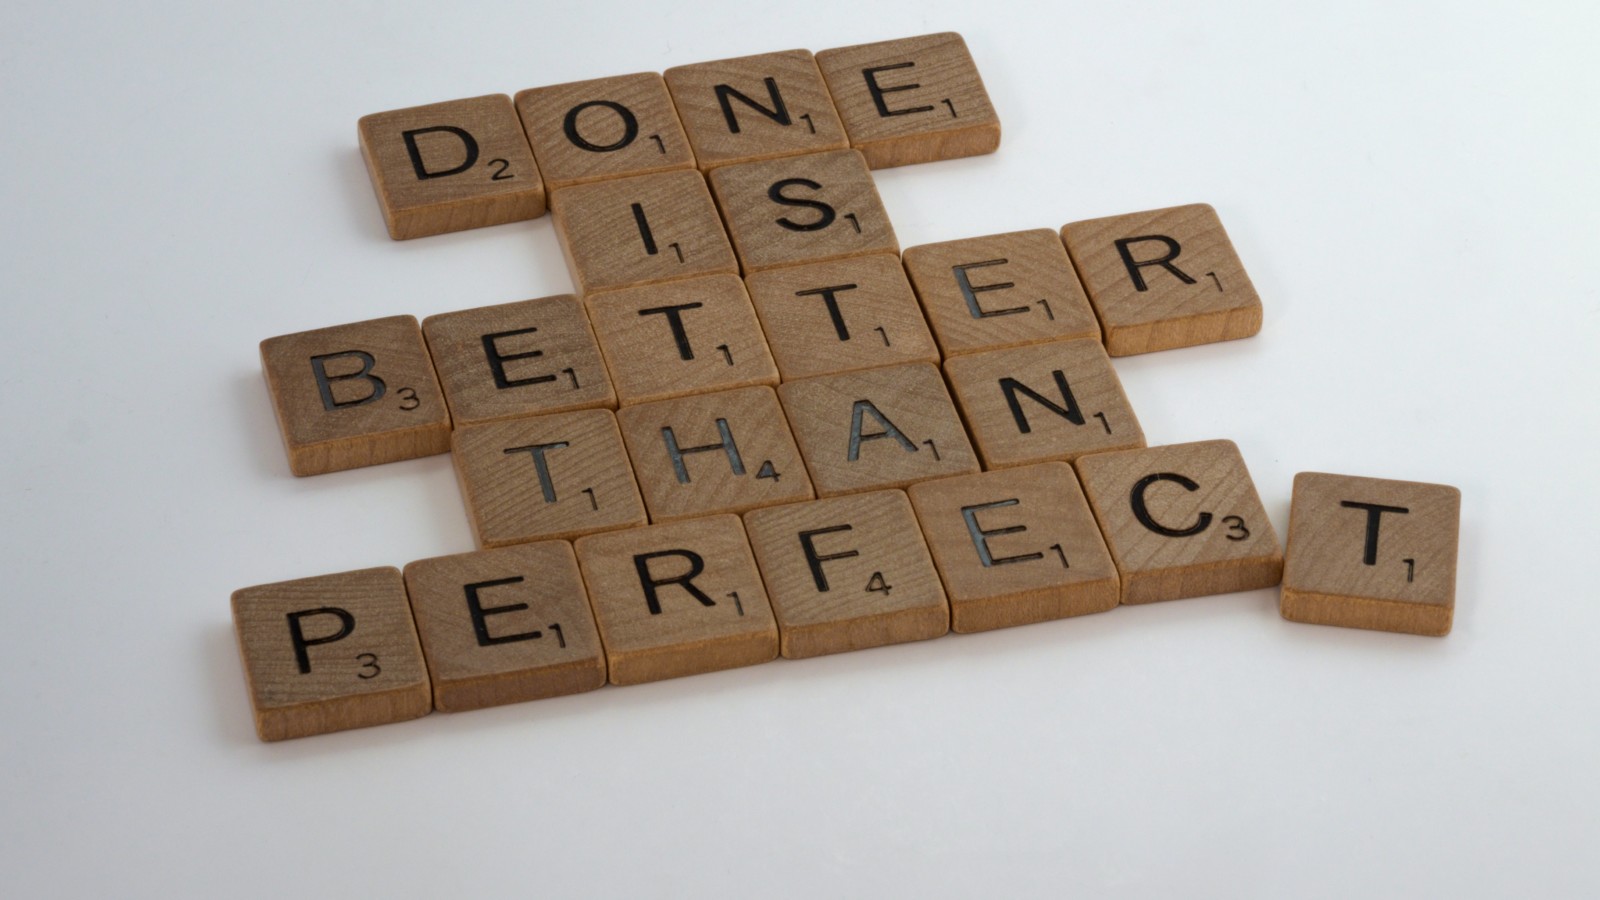 scrabble pieces spelling out "done is better than perfect"